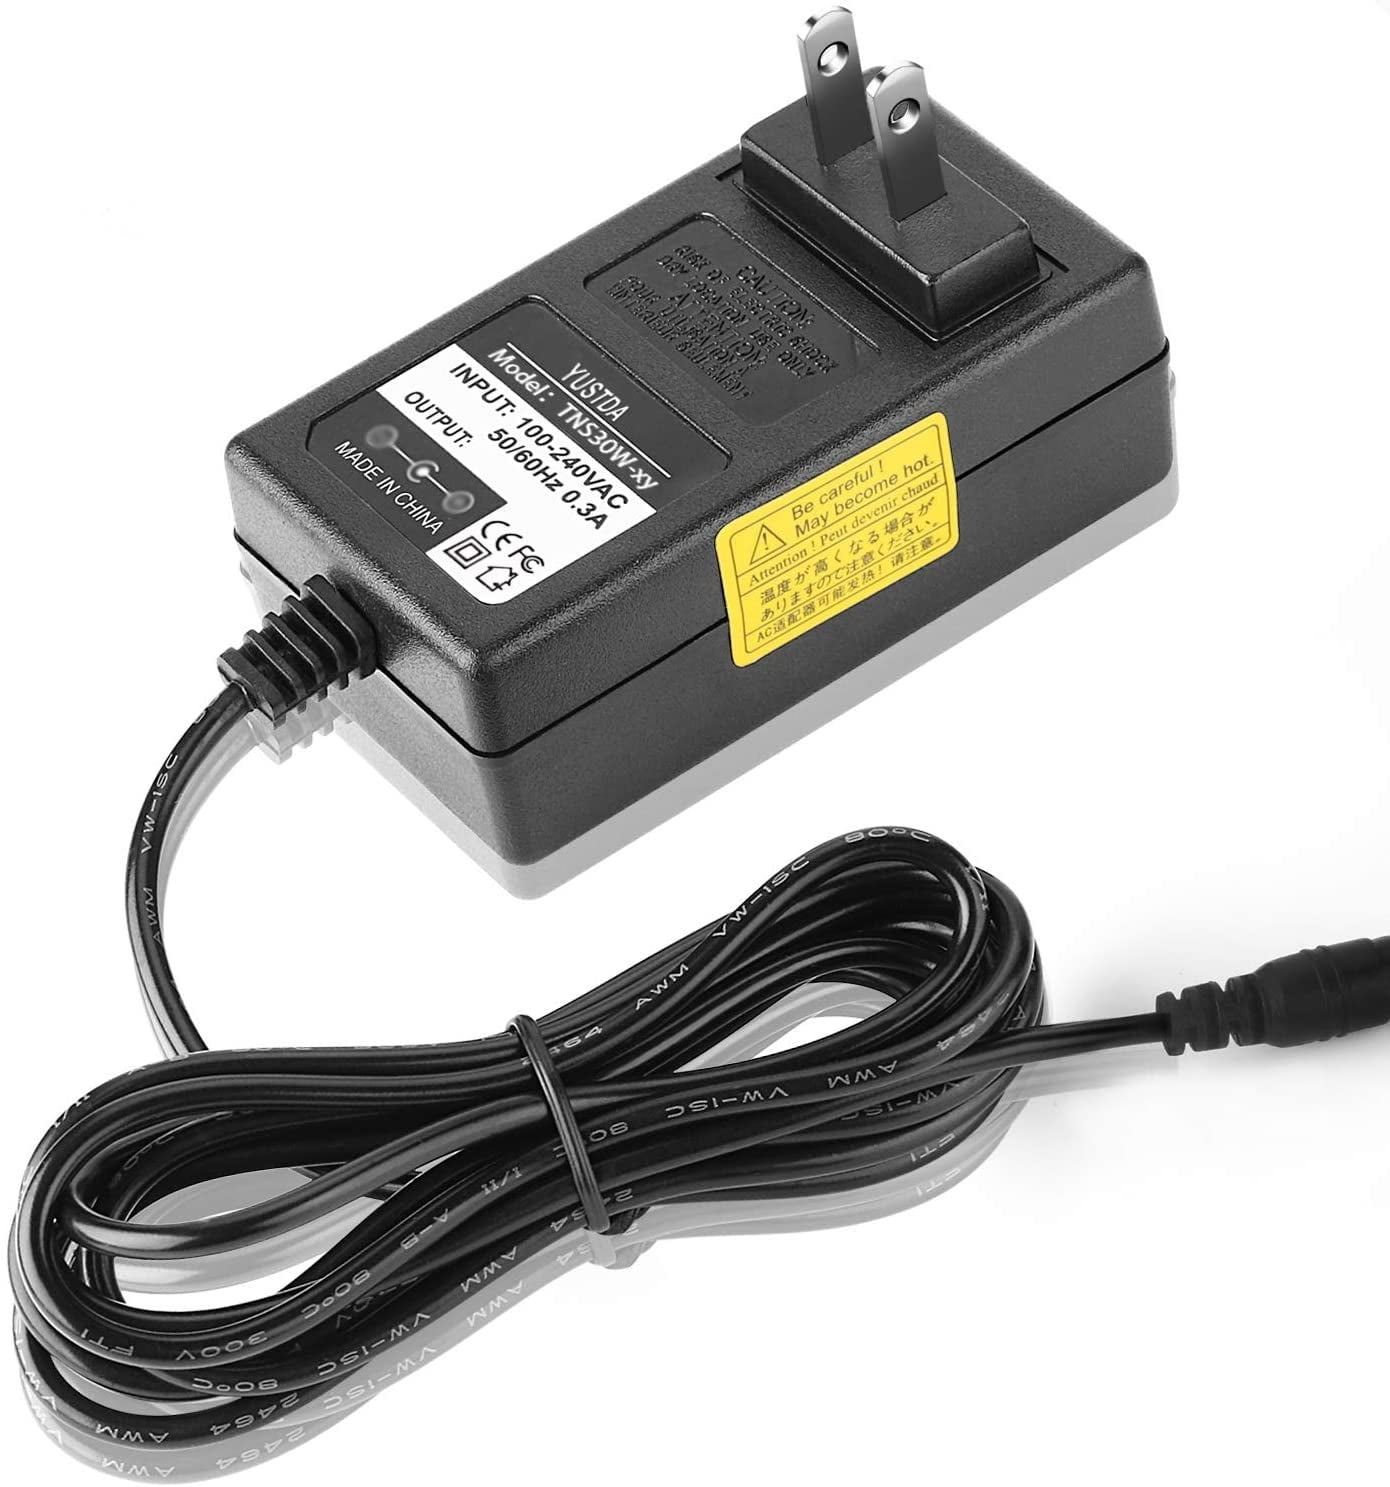 RG100 MK2 1.7A MK1 Yustda 6.5Ft AC/AC Adapter Replacement for KURZWEIL 13.5VDC MK3 PD135-17A Power Supply Cord Cable PS Battery Charger Mains PSU 